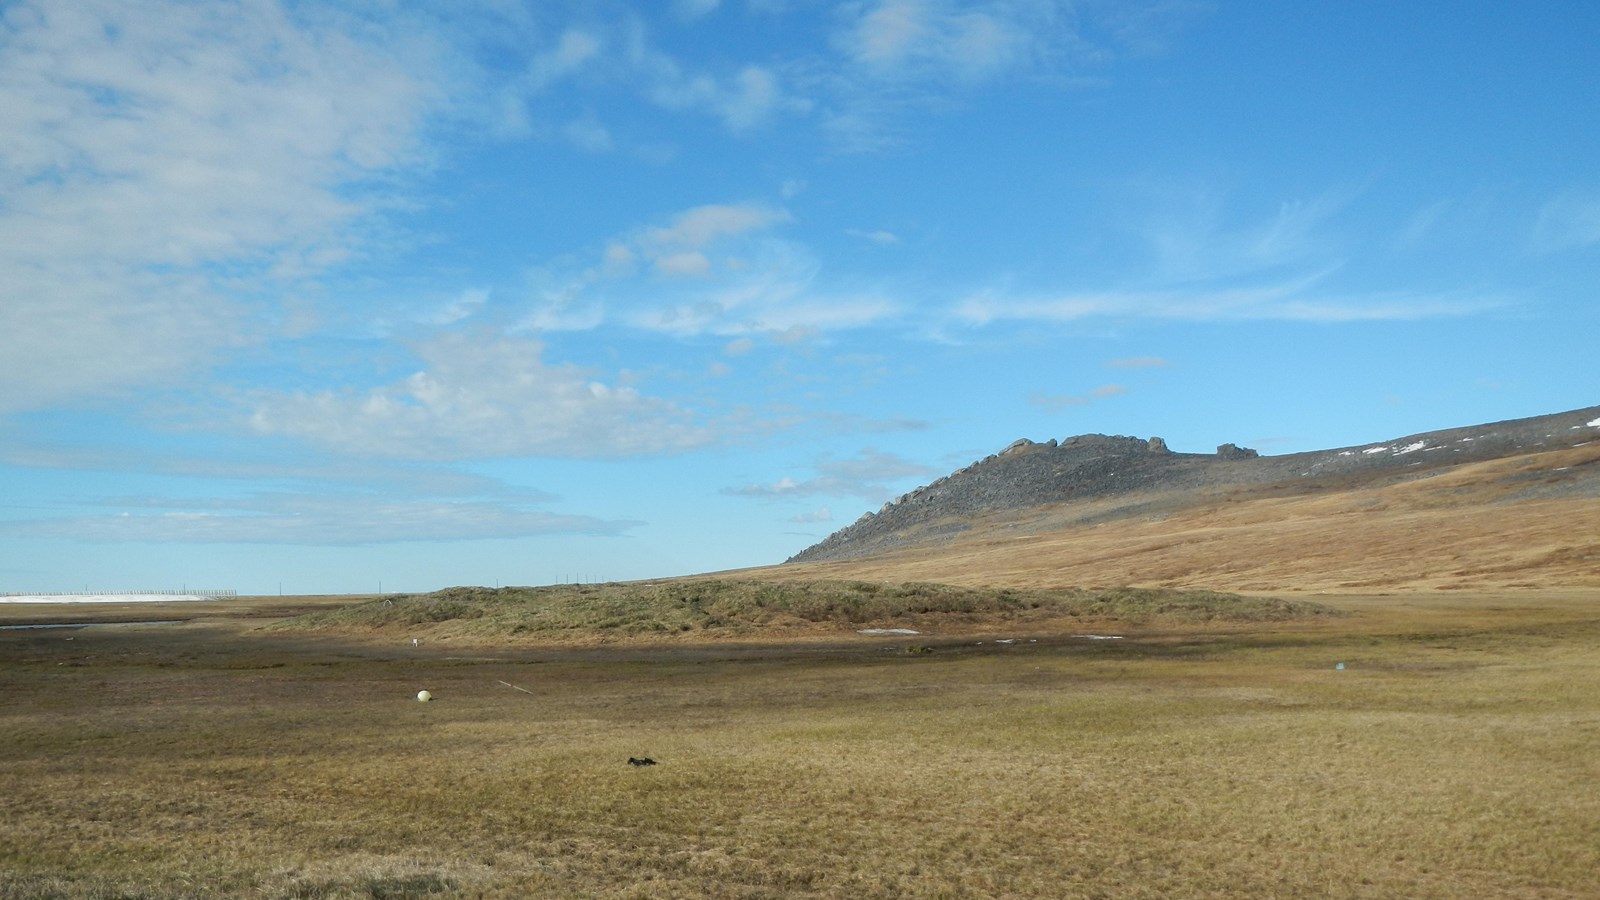 A grassy mound on the tundra with a black rock ridge on the horizon and a sunny sky.